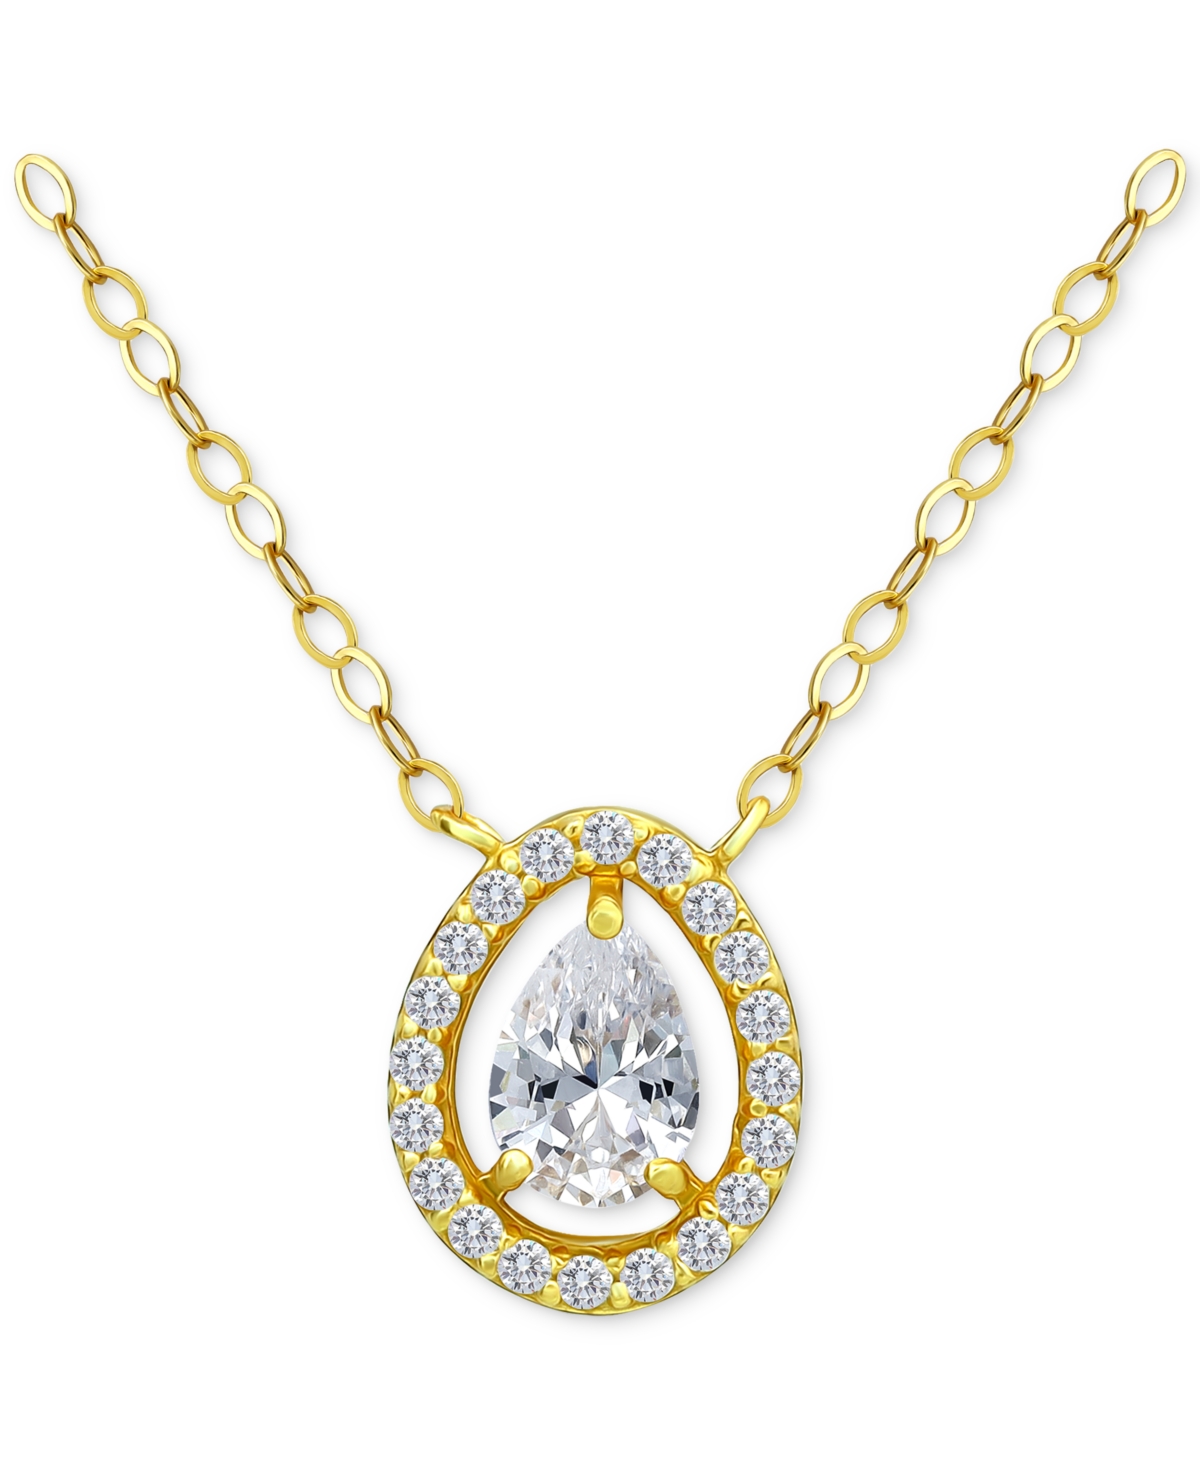 Giani Bernini Cubic Zirconia Pear Halo Pendant Necklace In 18k Gold-plated Sterling Silver, 16" + 2", Created For